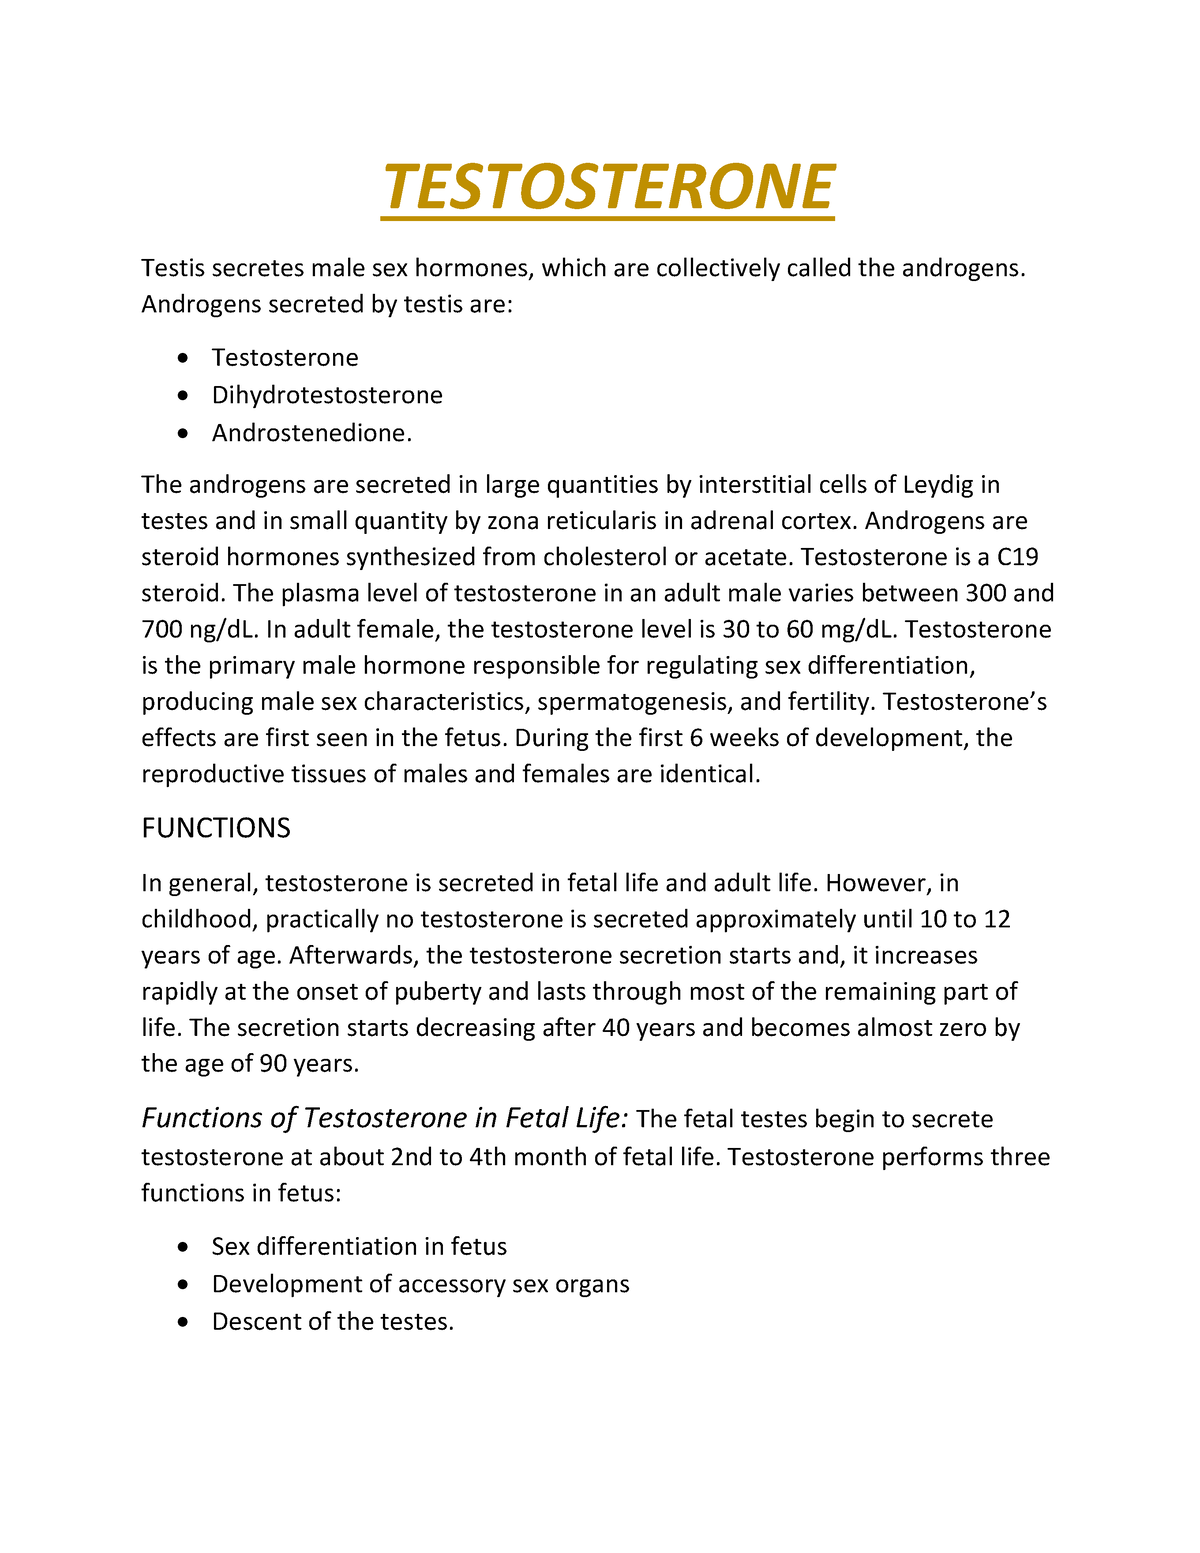 Testosterone Testosterone Testis Secretes Male Sex Hormones Which Are Collectively Called The